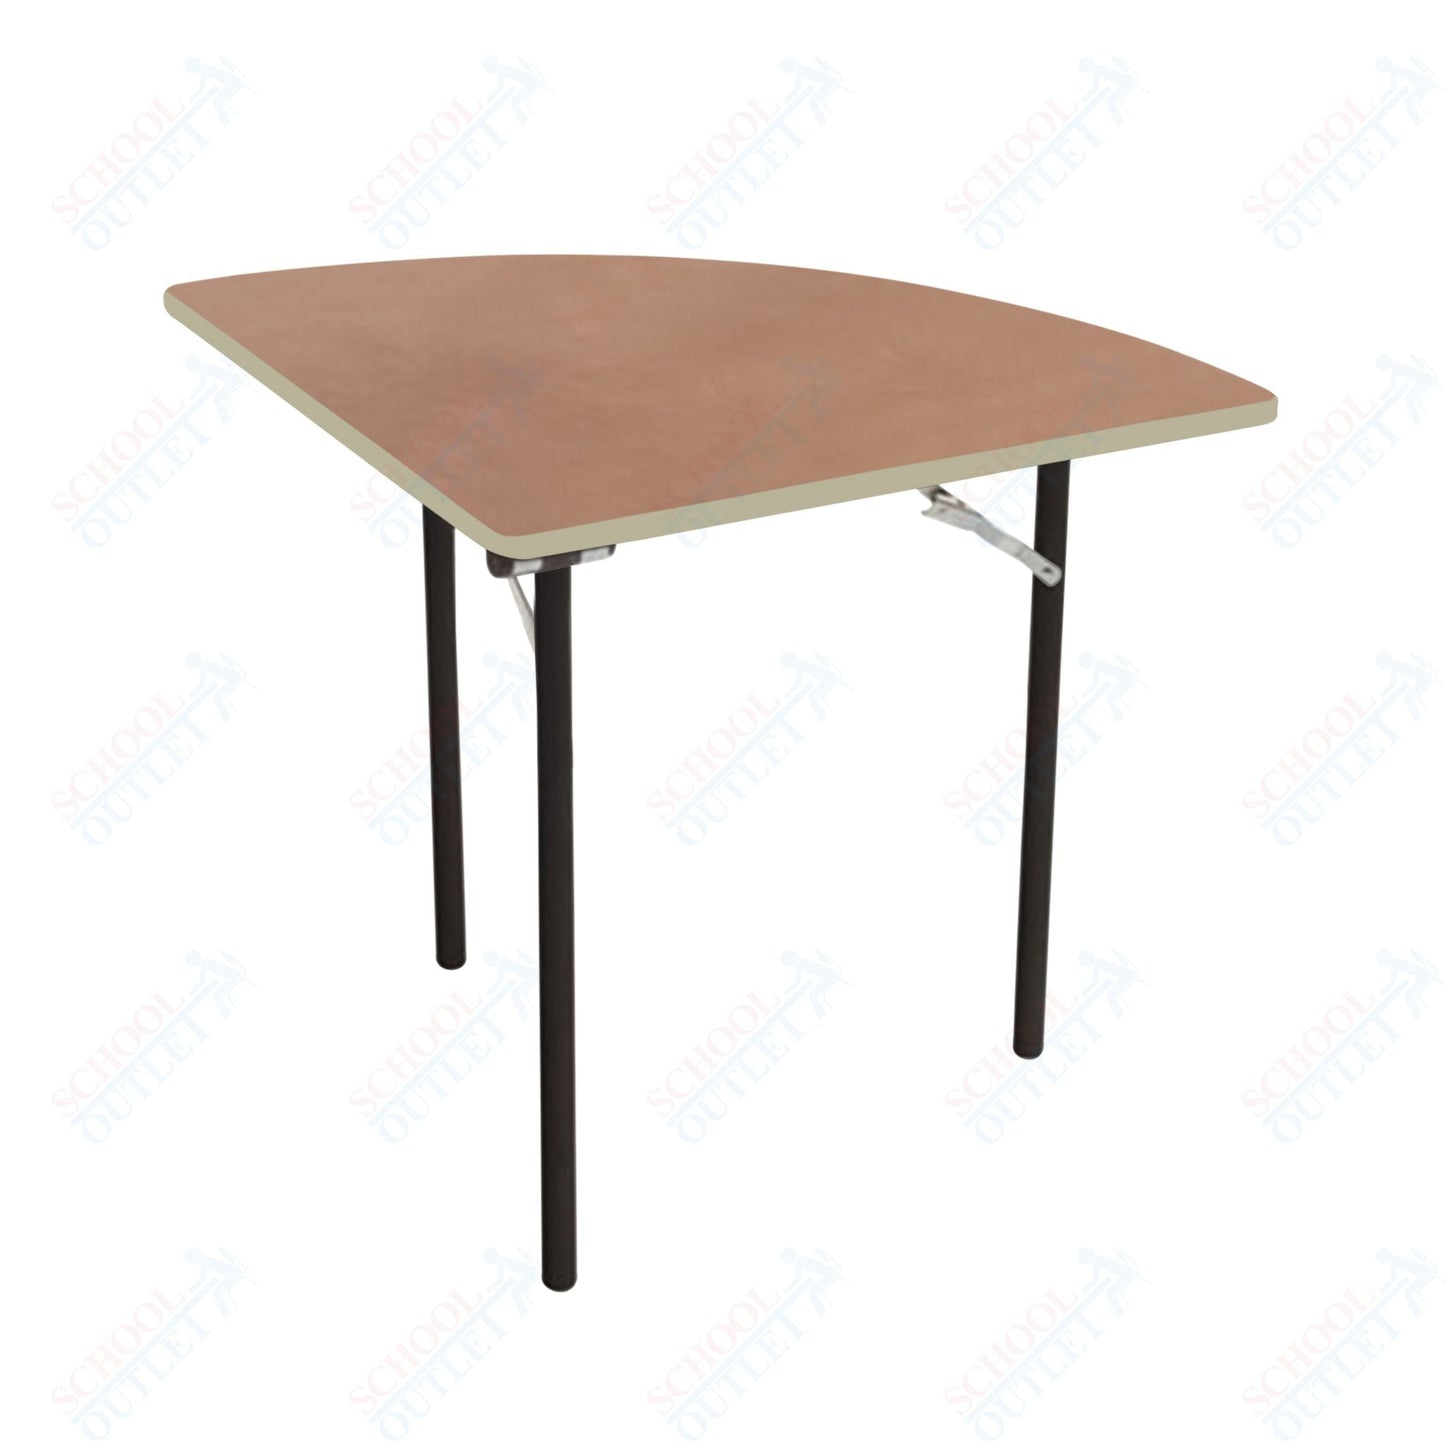 AmTab Folding Table - Plywood Stained and Sealed - Vinyl T - Molding Edge - Quarter Round - Quarter 96" Diameter x 29"H (AmTab AMT - QR96PM) - SchoolOutlet